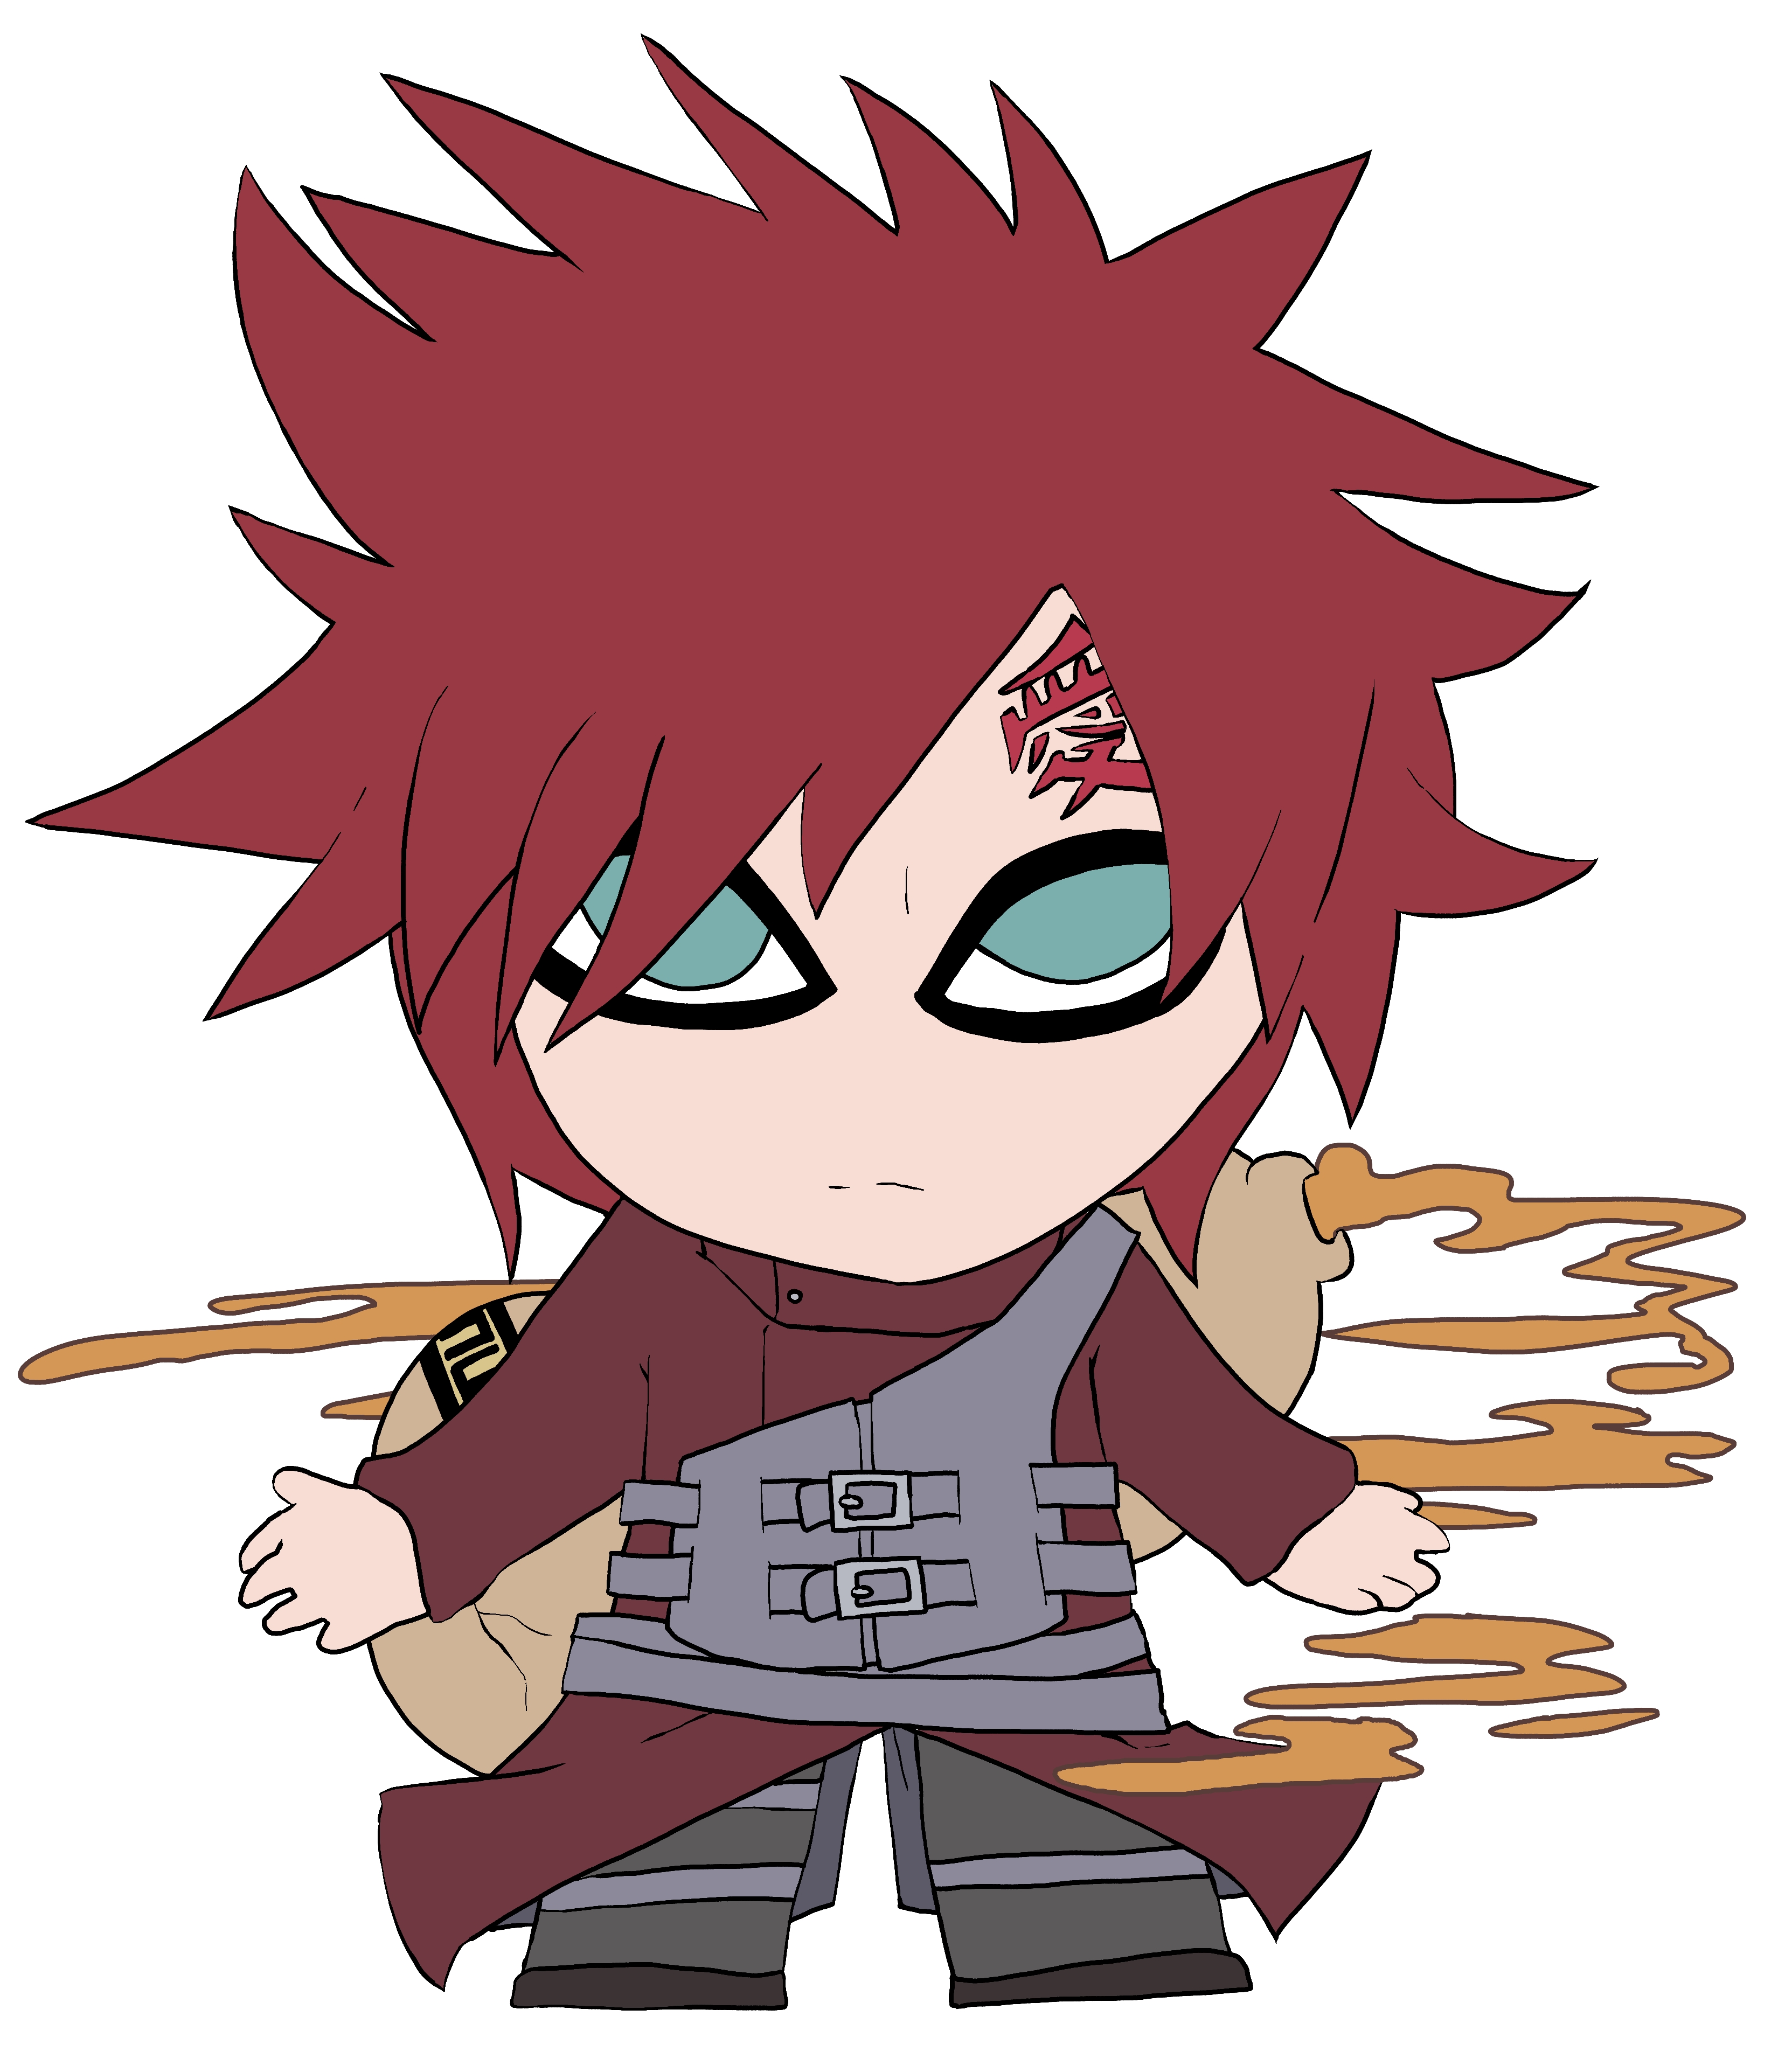 Chibi Gaara of the Sand by animereviewguy